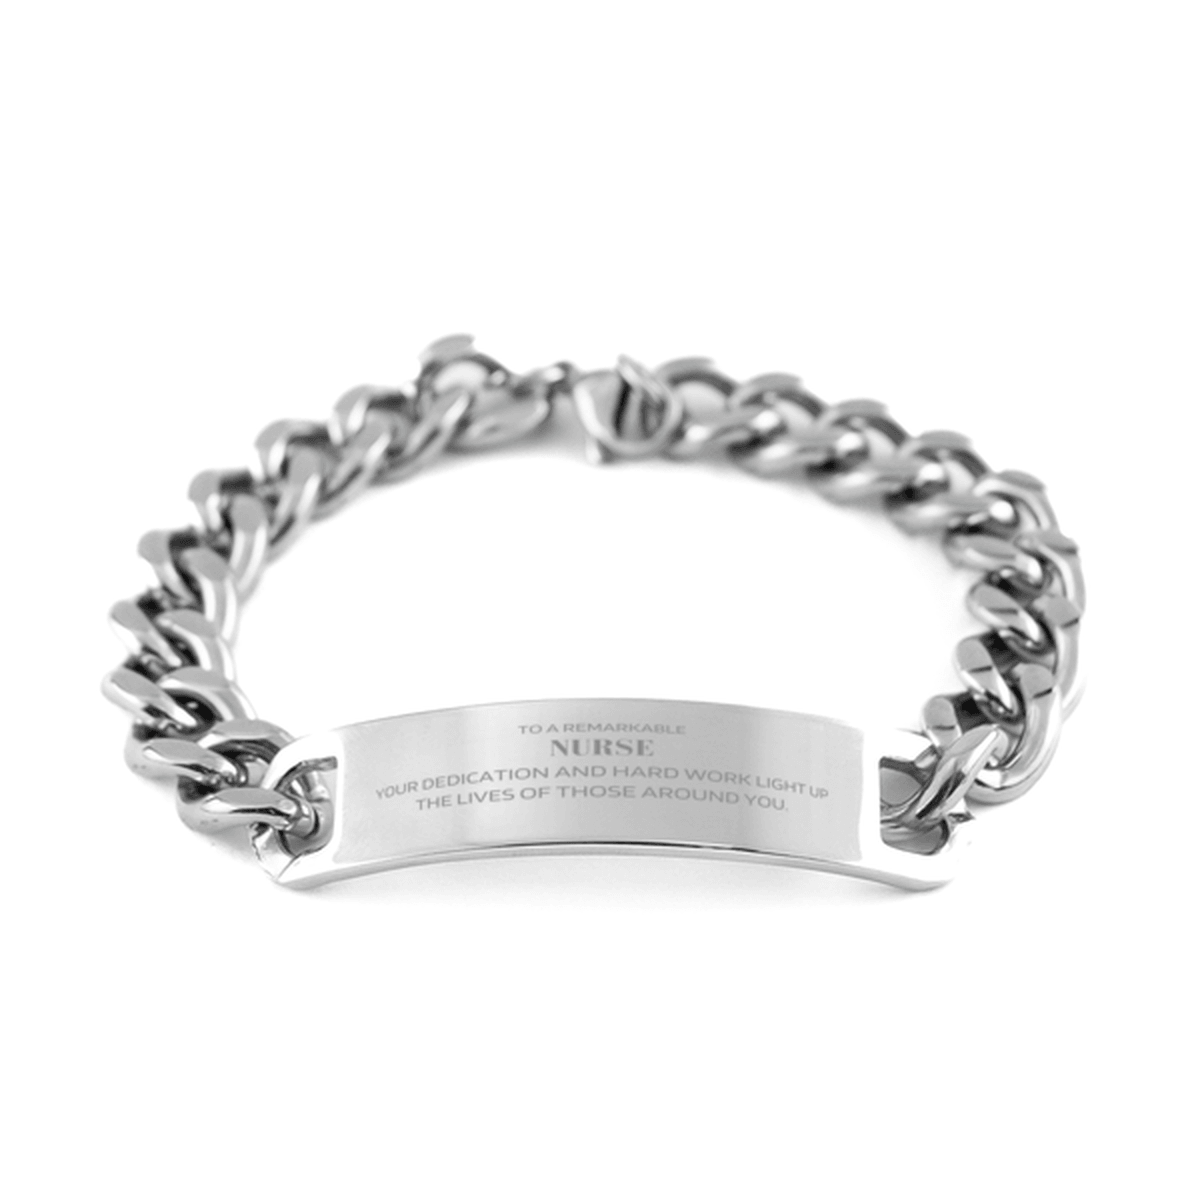 Remarkable Nurse Gifts, Your dedication and hard work, Inspirational Birthday Christmas Unique Cuban Chain Stainless Steel Bracelet For Nurse, Coworkers, Men, Women, Friends - Mallard Moon Gift Shop